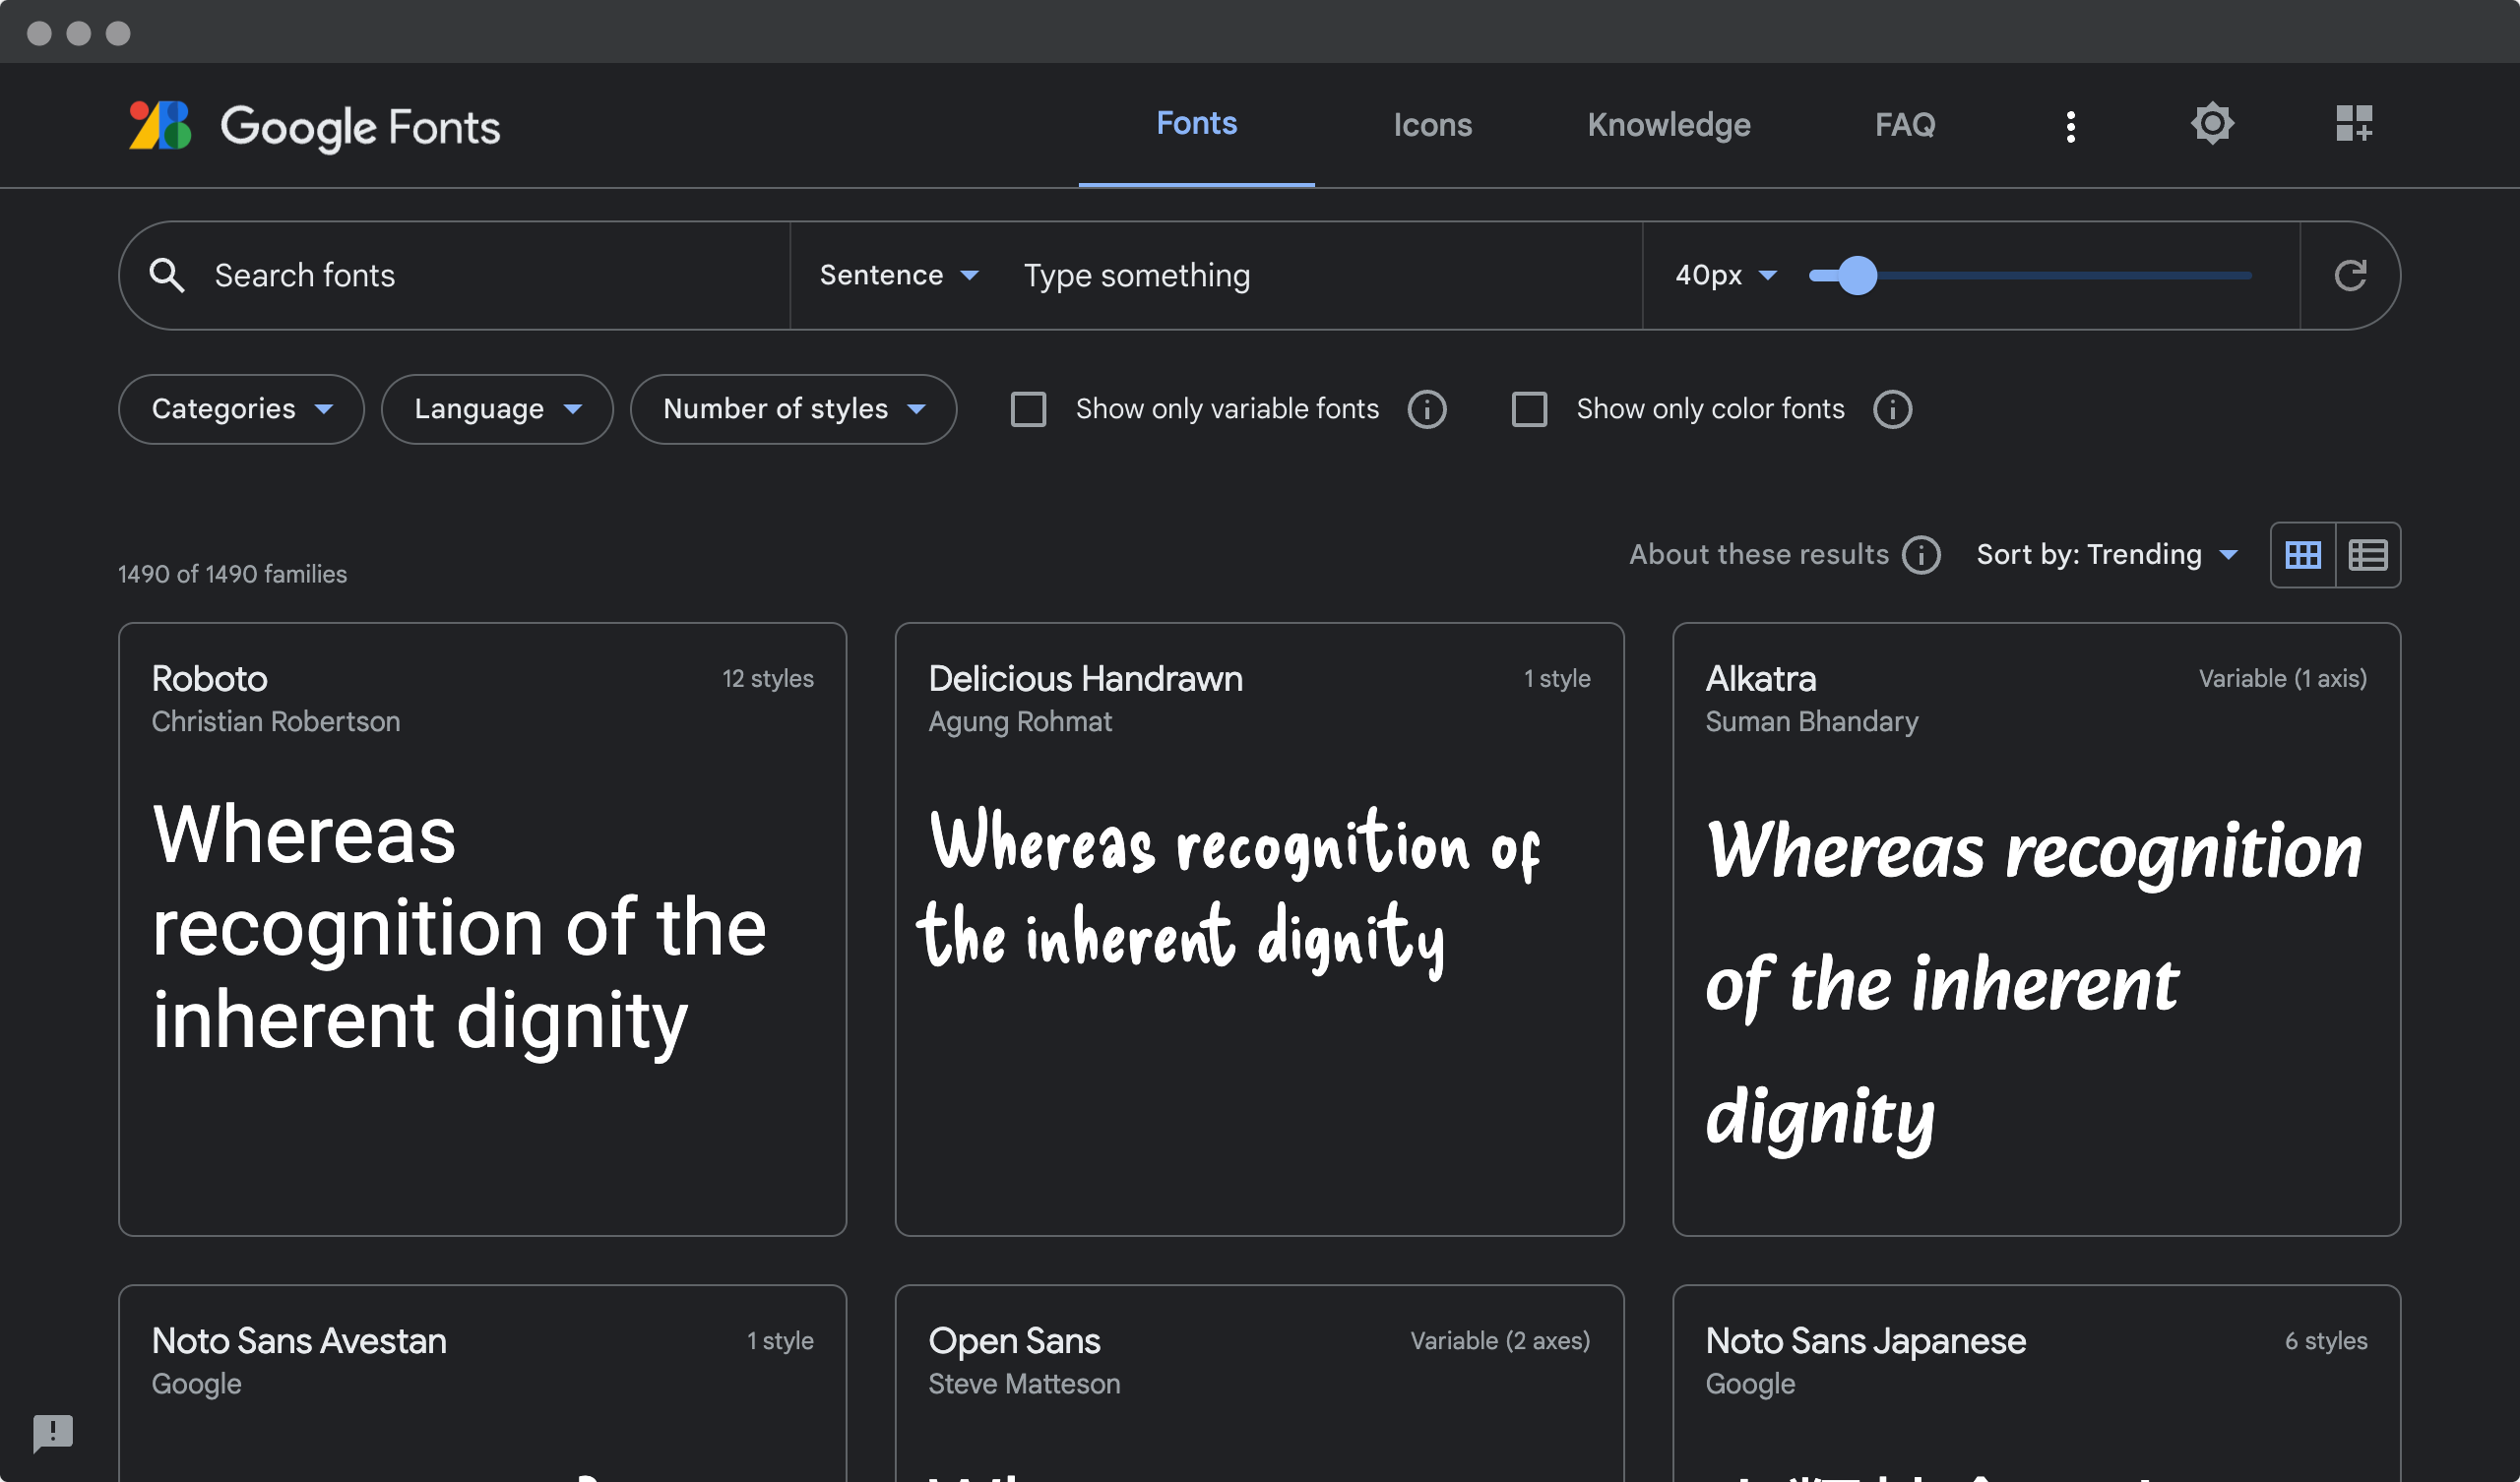 Screenshot of the Google Fonts website with a selection of fonts